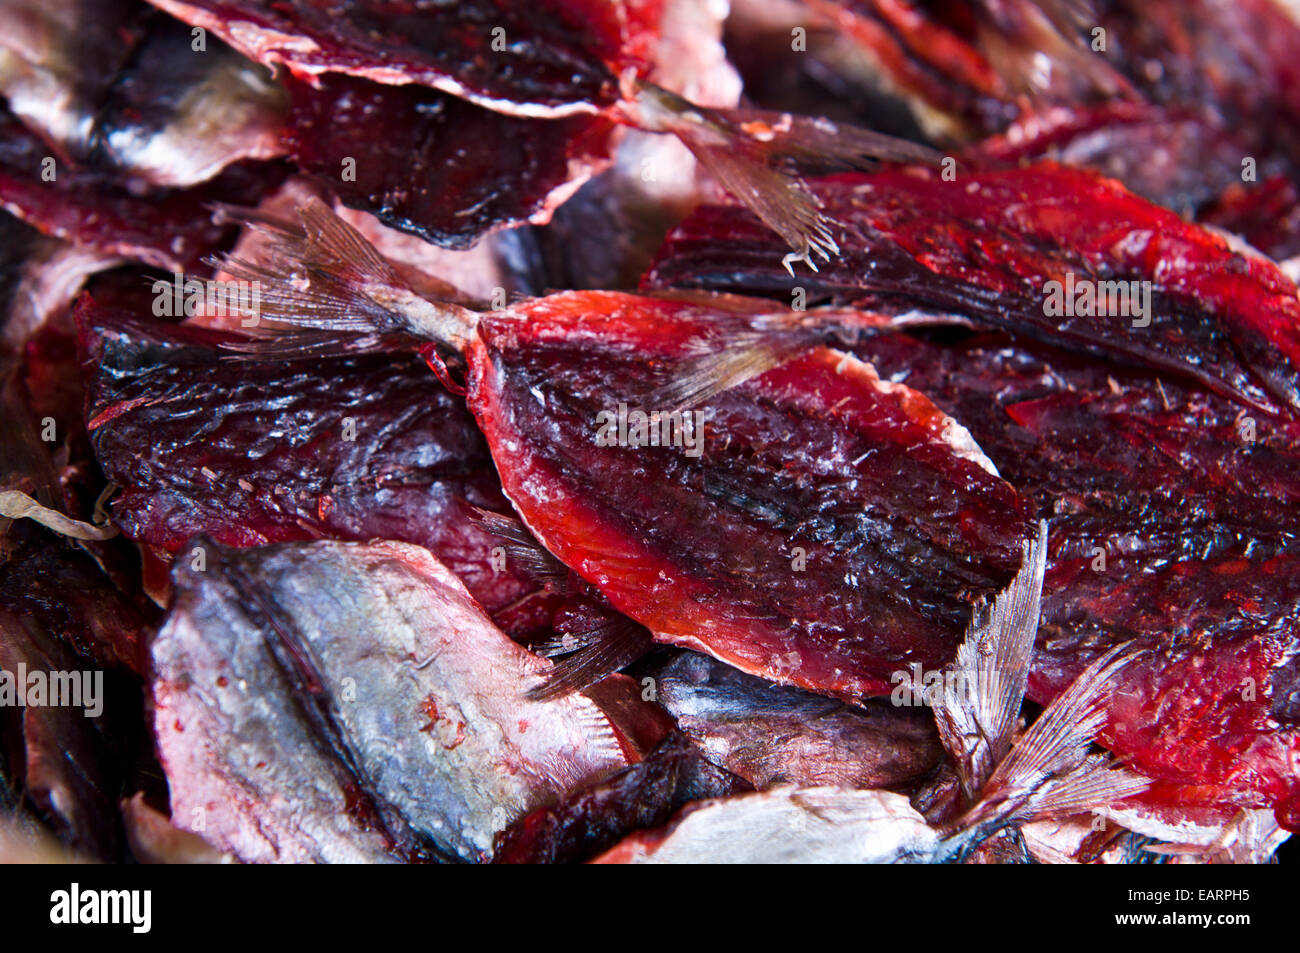 Dried bright red filleted fish for sale in an open air market stall. Stock Photo